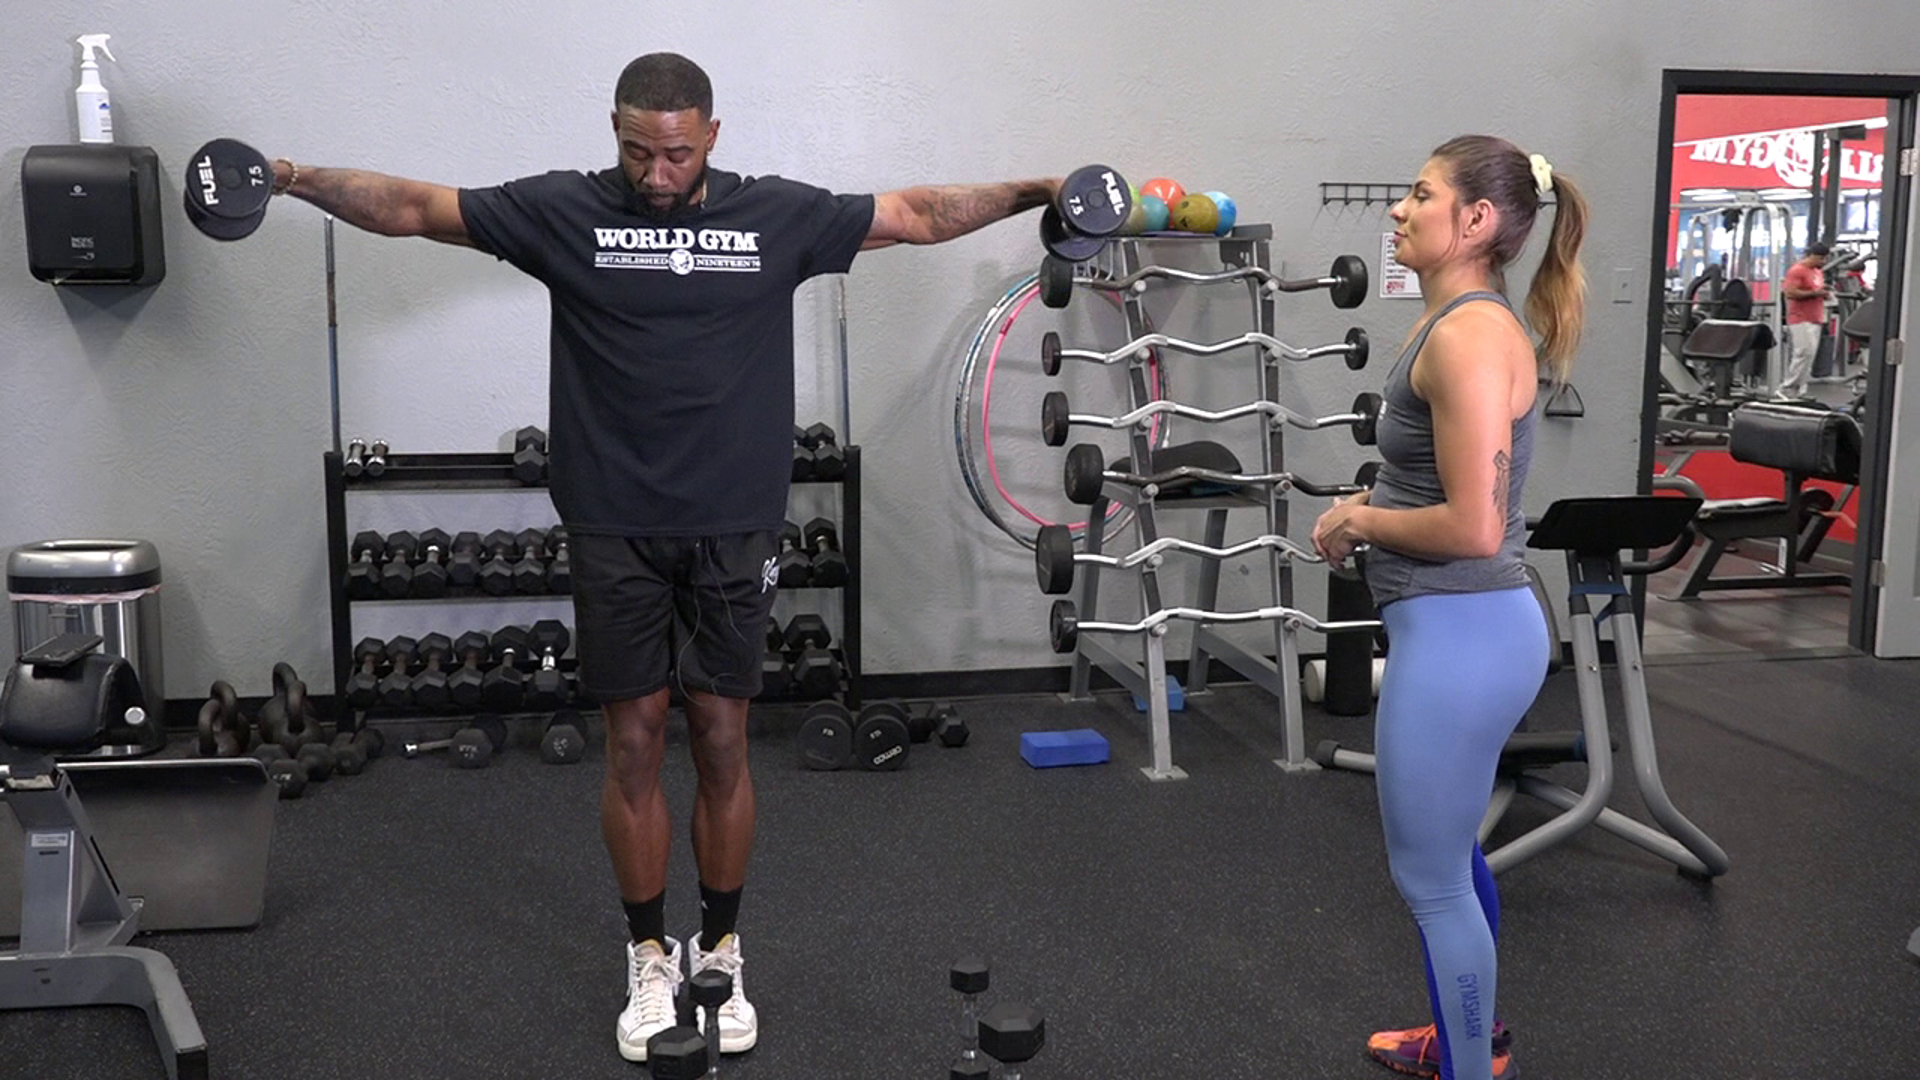 12News' Saphire Cervantes and trainer Derek Moore demonstrate a shoulder workout and show how you can train your shoulders at home.